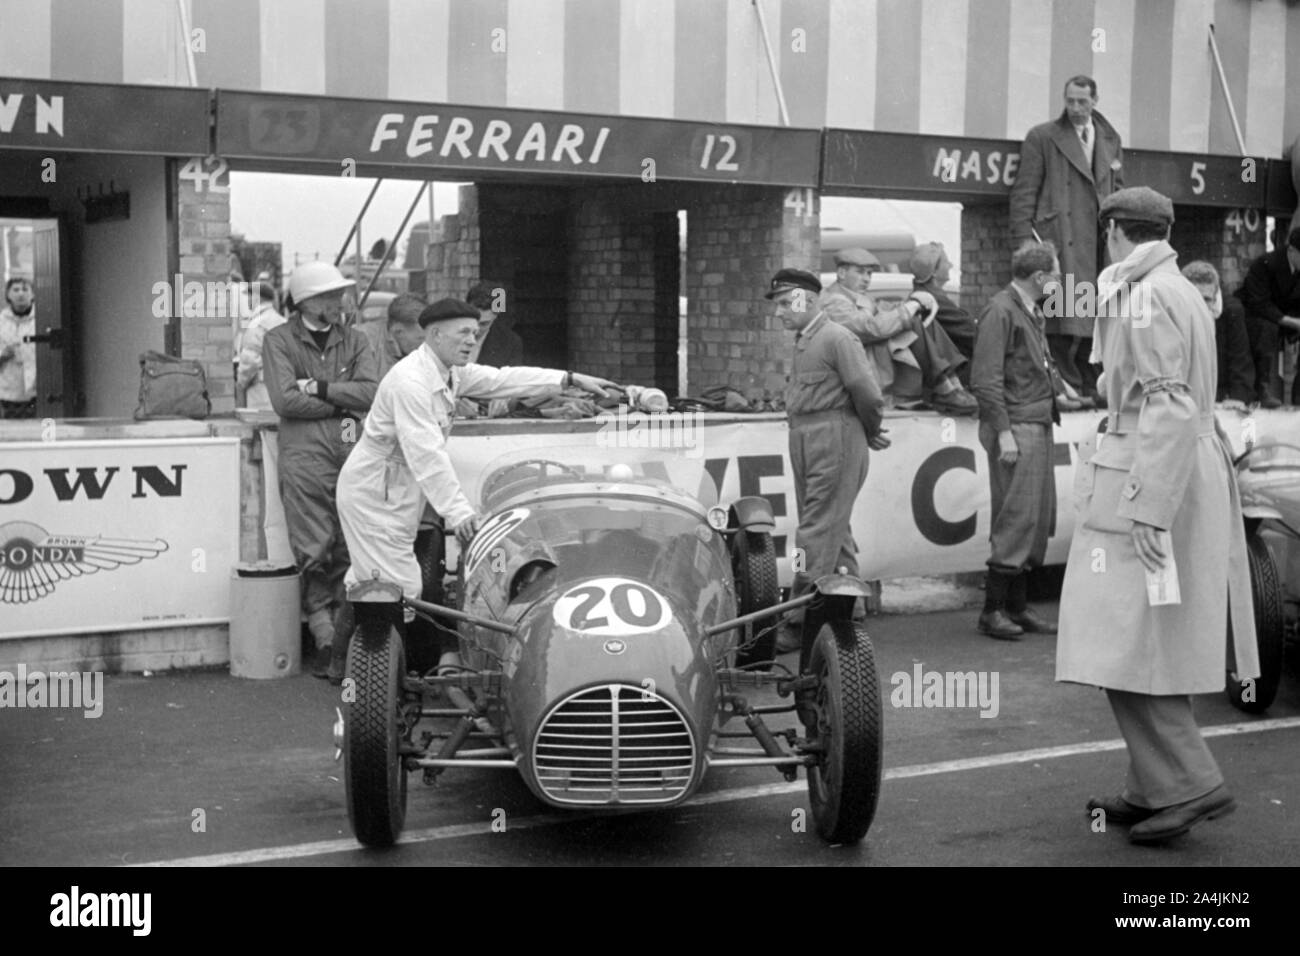 1951 Killeen - MG, D.Pitt in pits at Silverstone during British GP meeting. Stock Photo